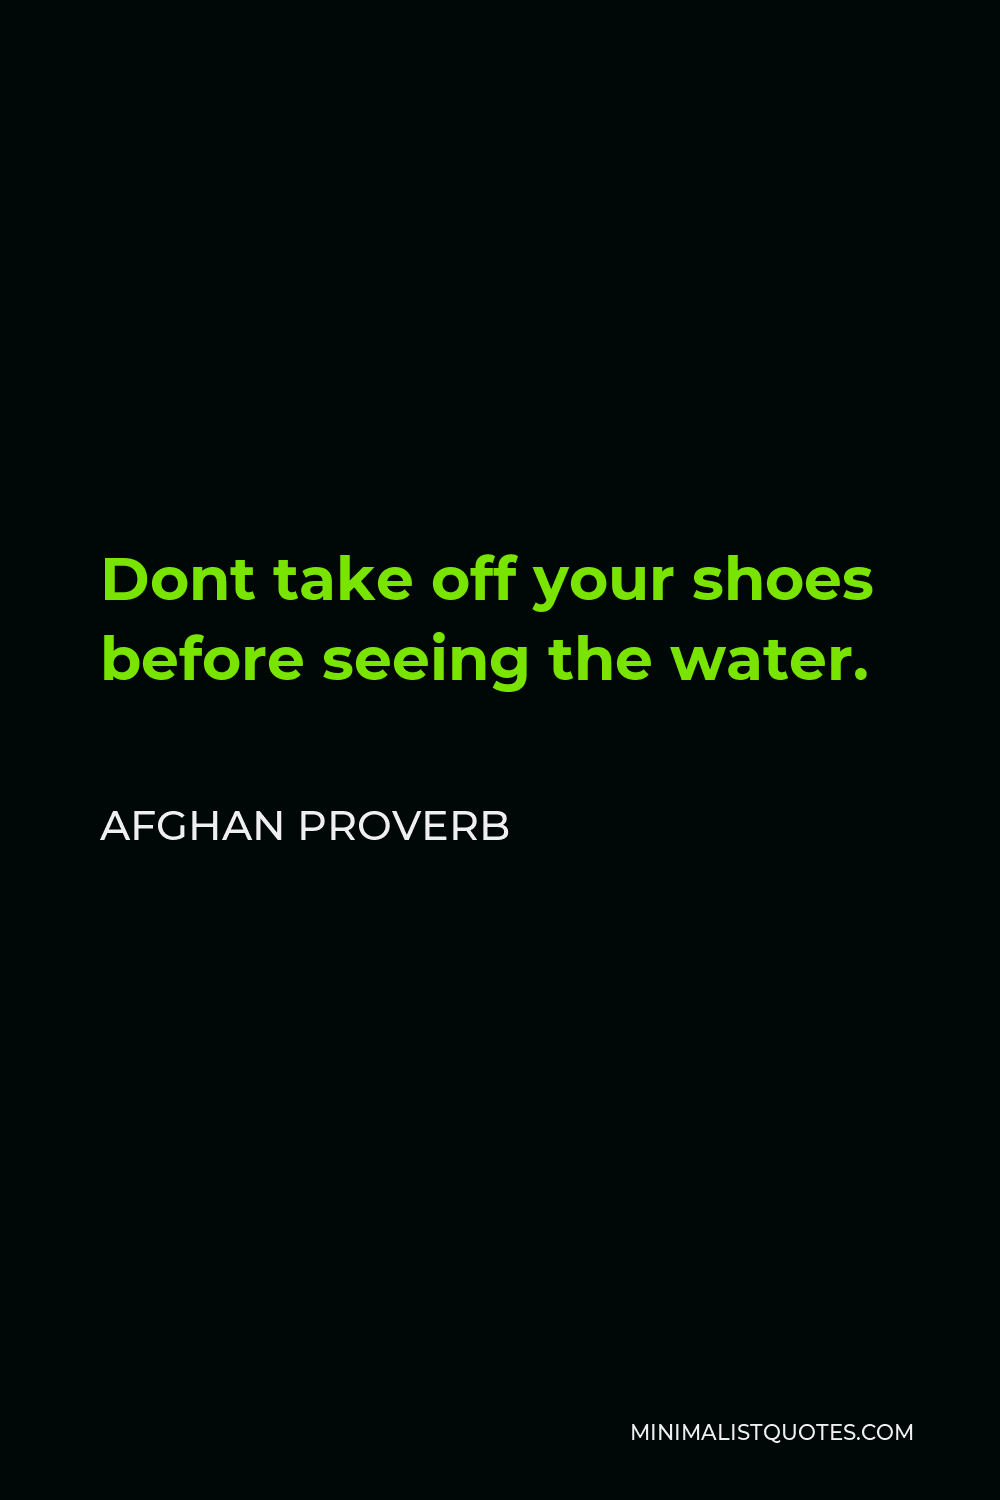 Afghan Proverb Quote - Dont take off your shoes before seeing the water.